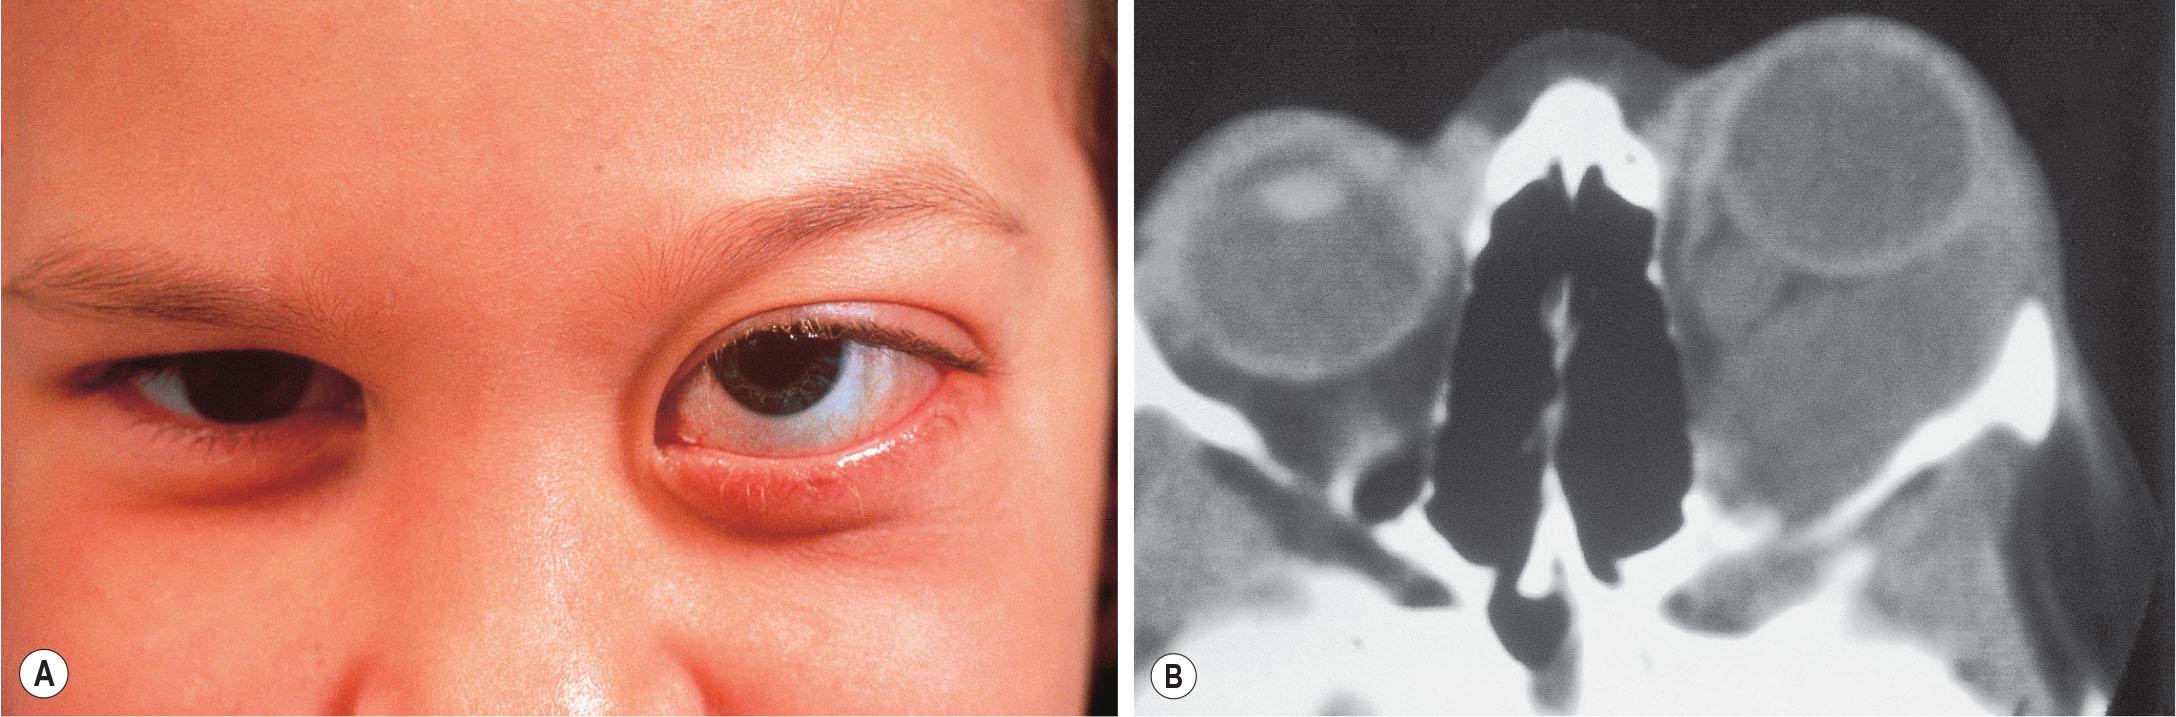 Fig. 20.3, Orbital venous-lymphatic malformation (lymphangioma). (A) Sudden onset of proptosis in the left eye of a previously asymptomatic 5-year-old child. (B) CT scan shows diffuse soft tissue density lesion arborizing through the retrobulbar tissues.